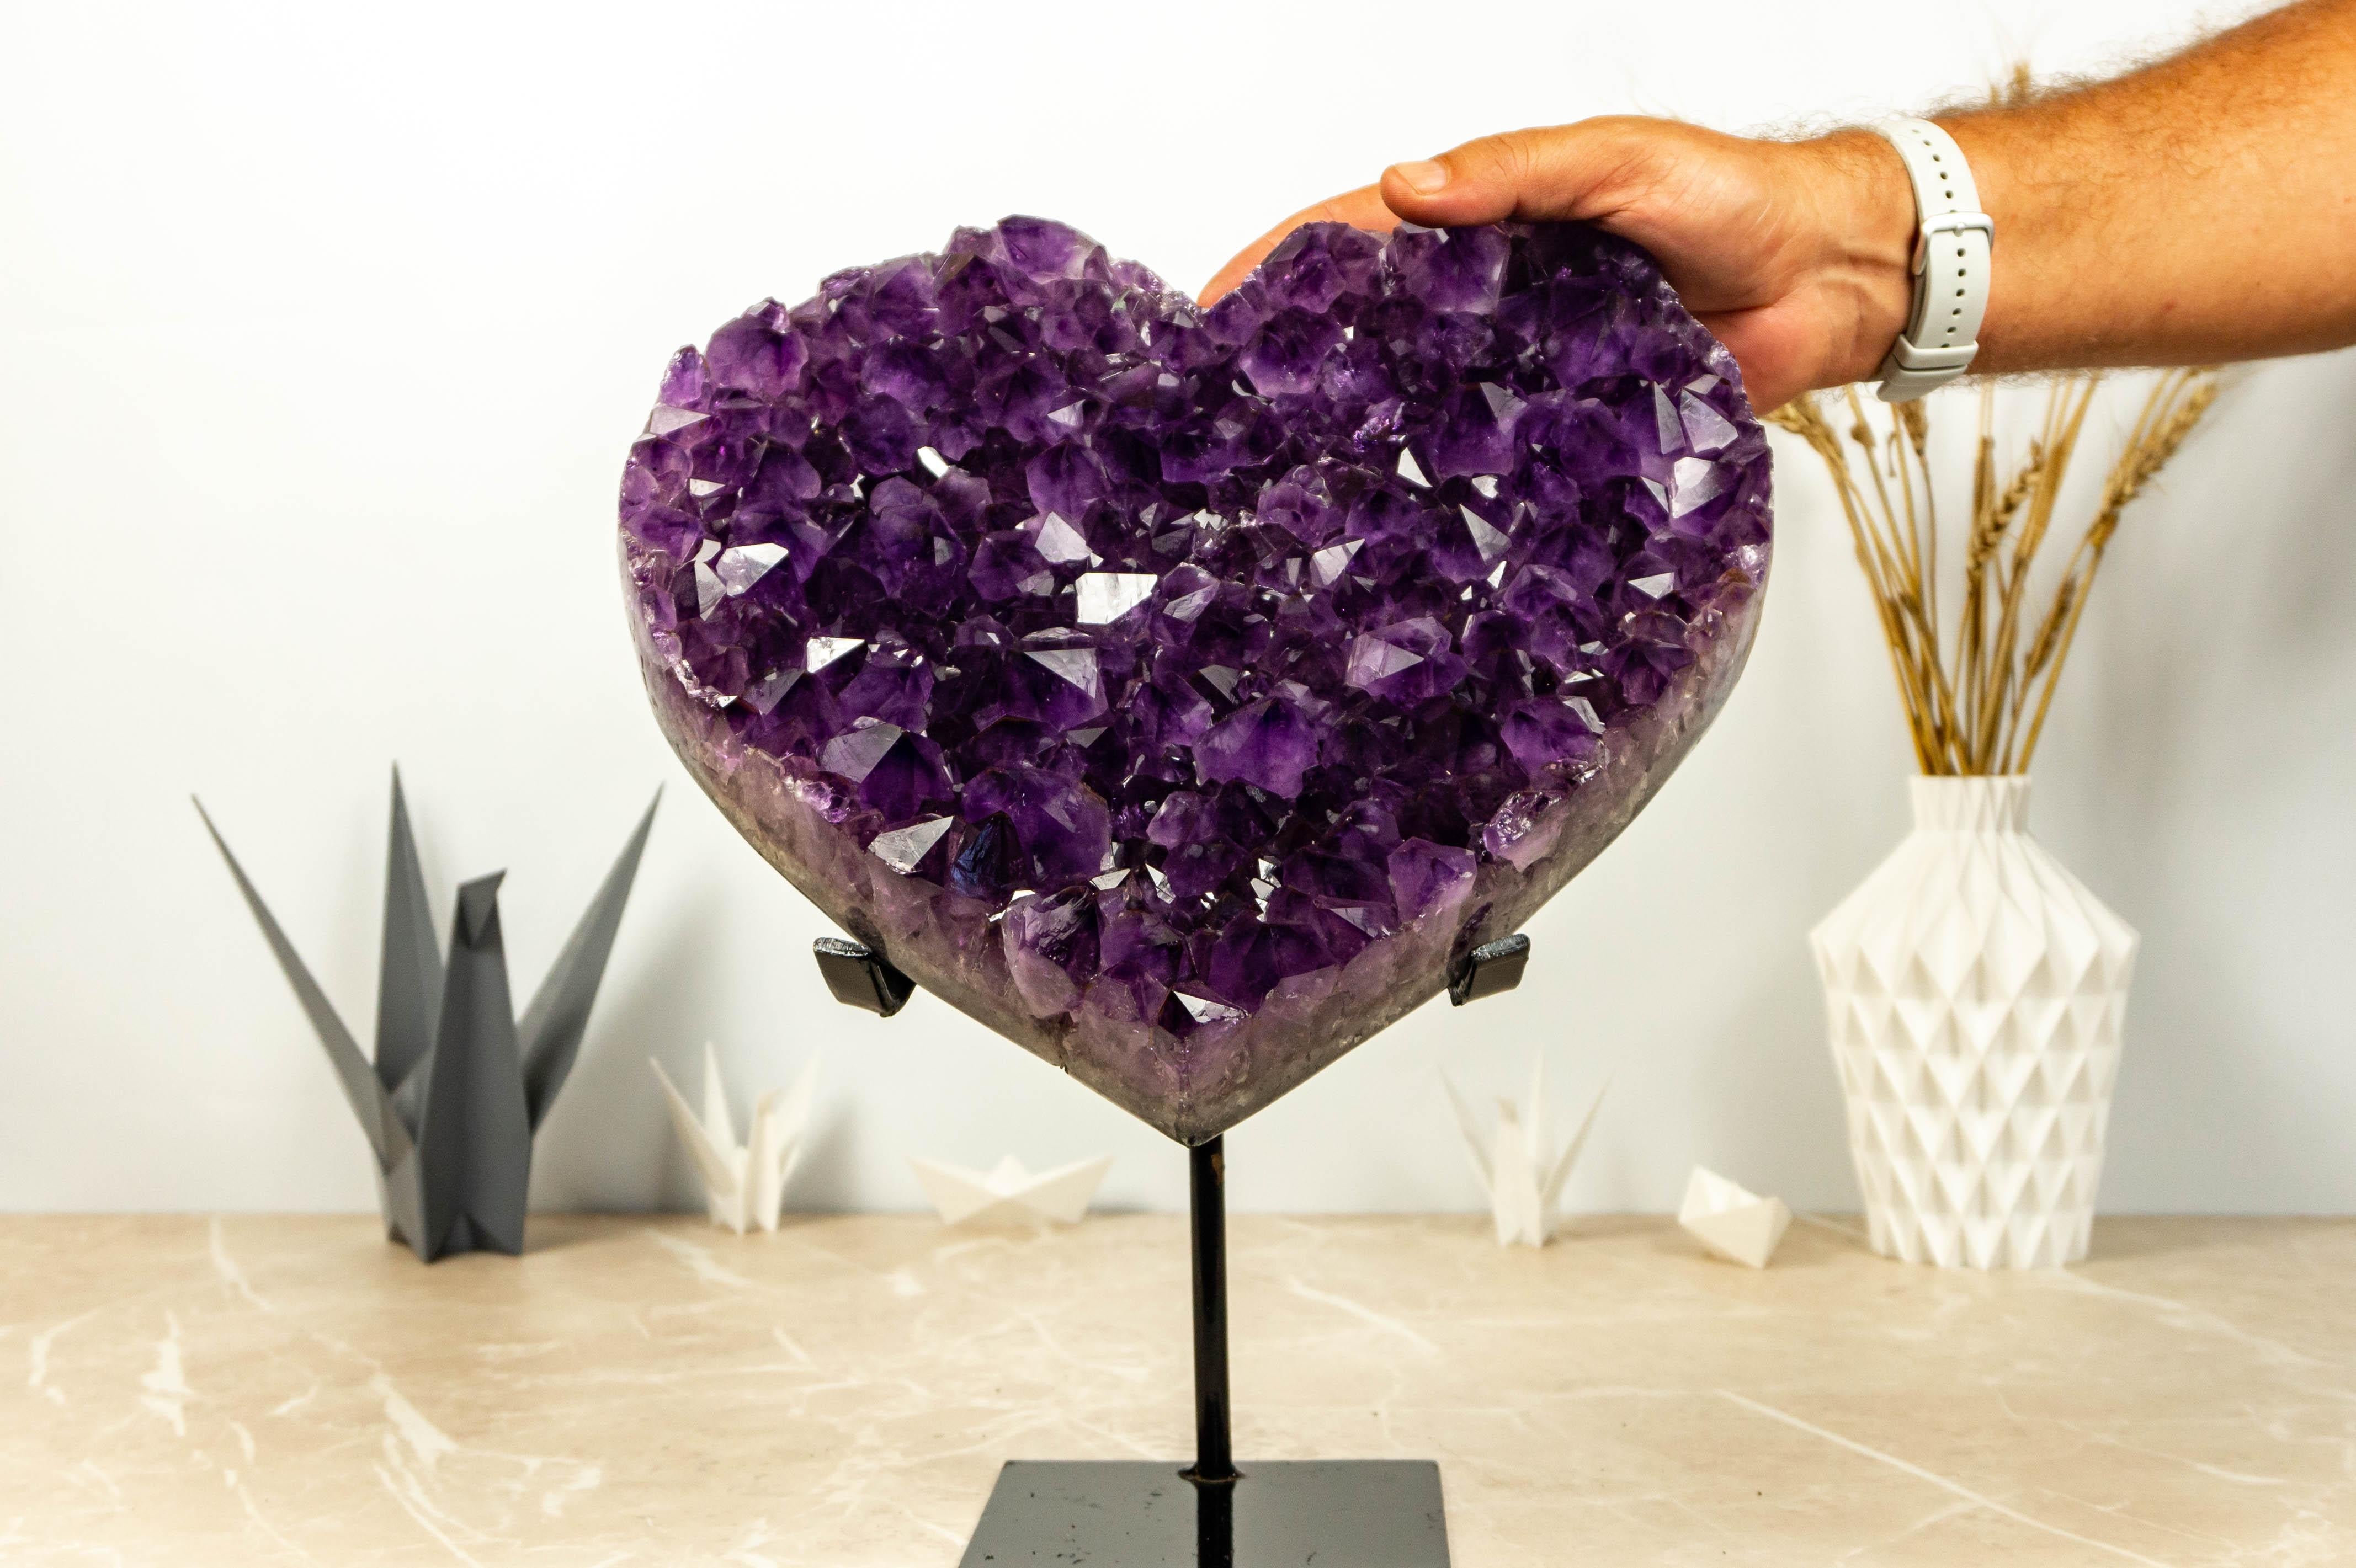 Stunning in every detail, this AAA Amethyst Heart showcases the deepest tone any amethyst can possess. With a large and translucent Amethyst Druzy naturally set in a beautiful green basalt, this combination creates a fascinating Amethyst Heart. It